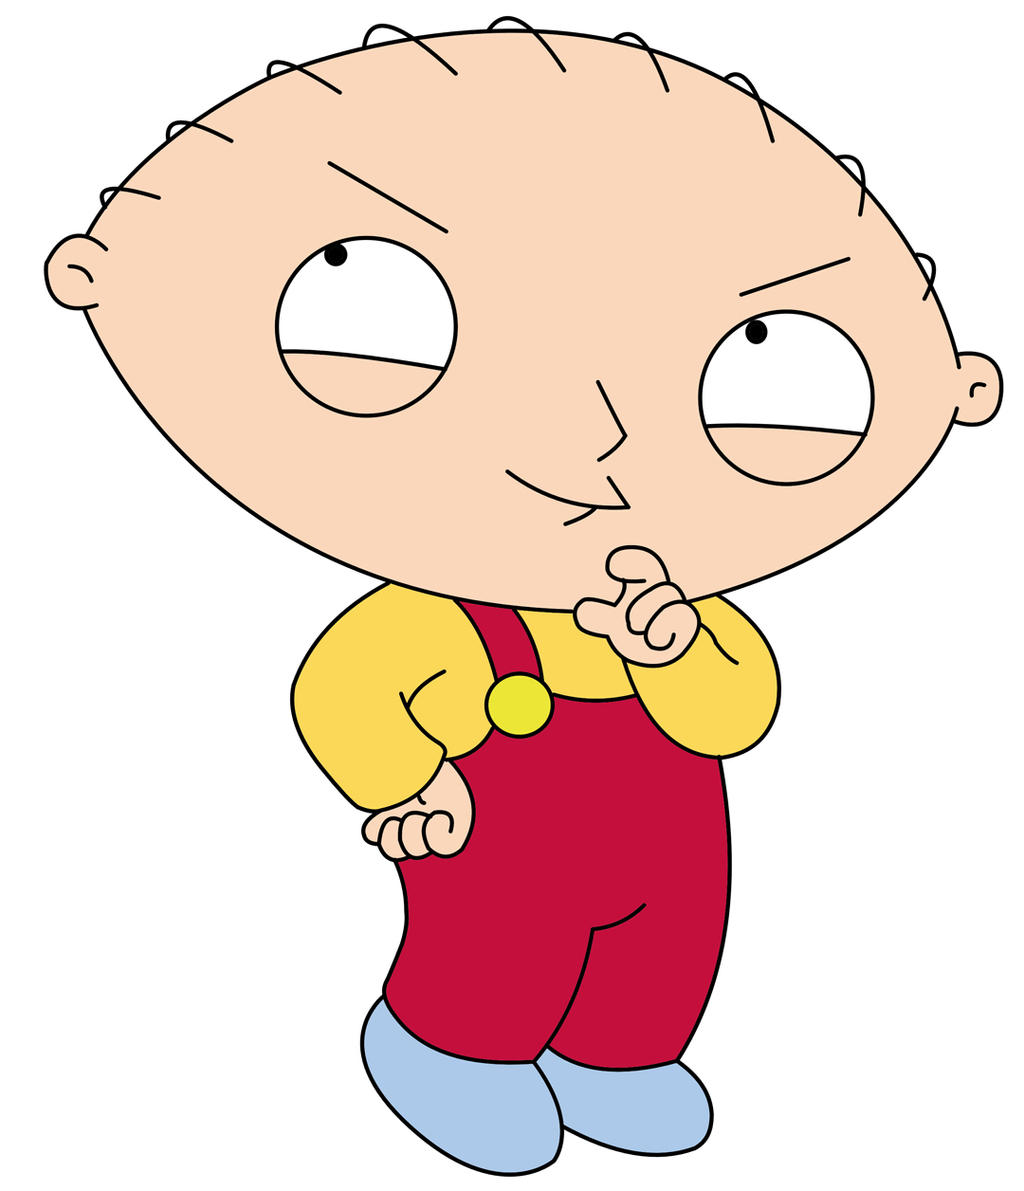 Griffin stewie Family Guy: